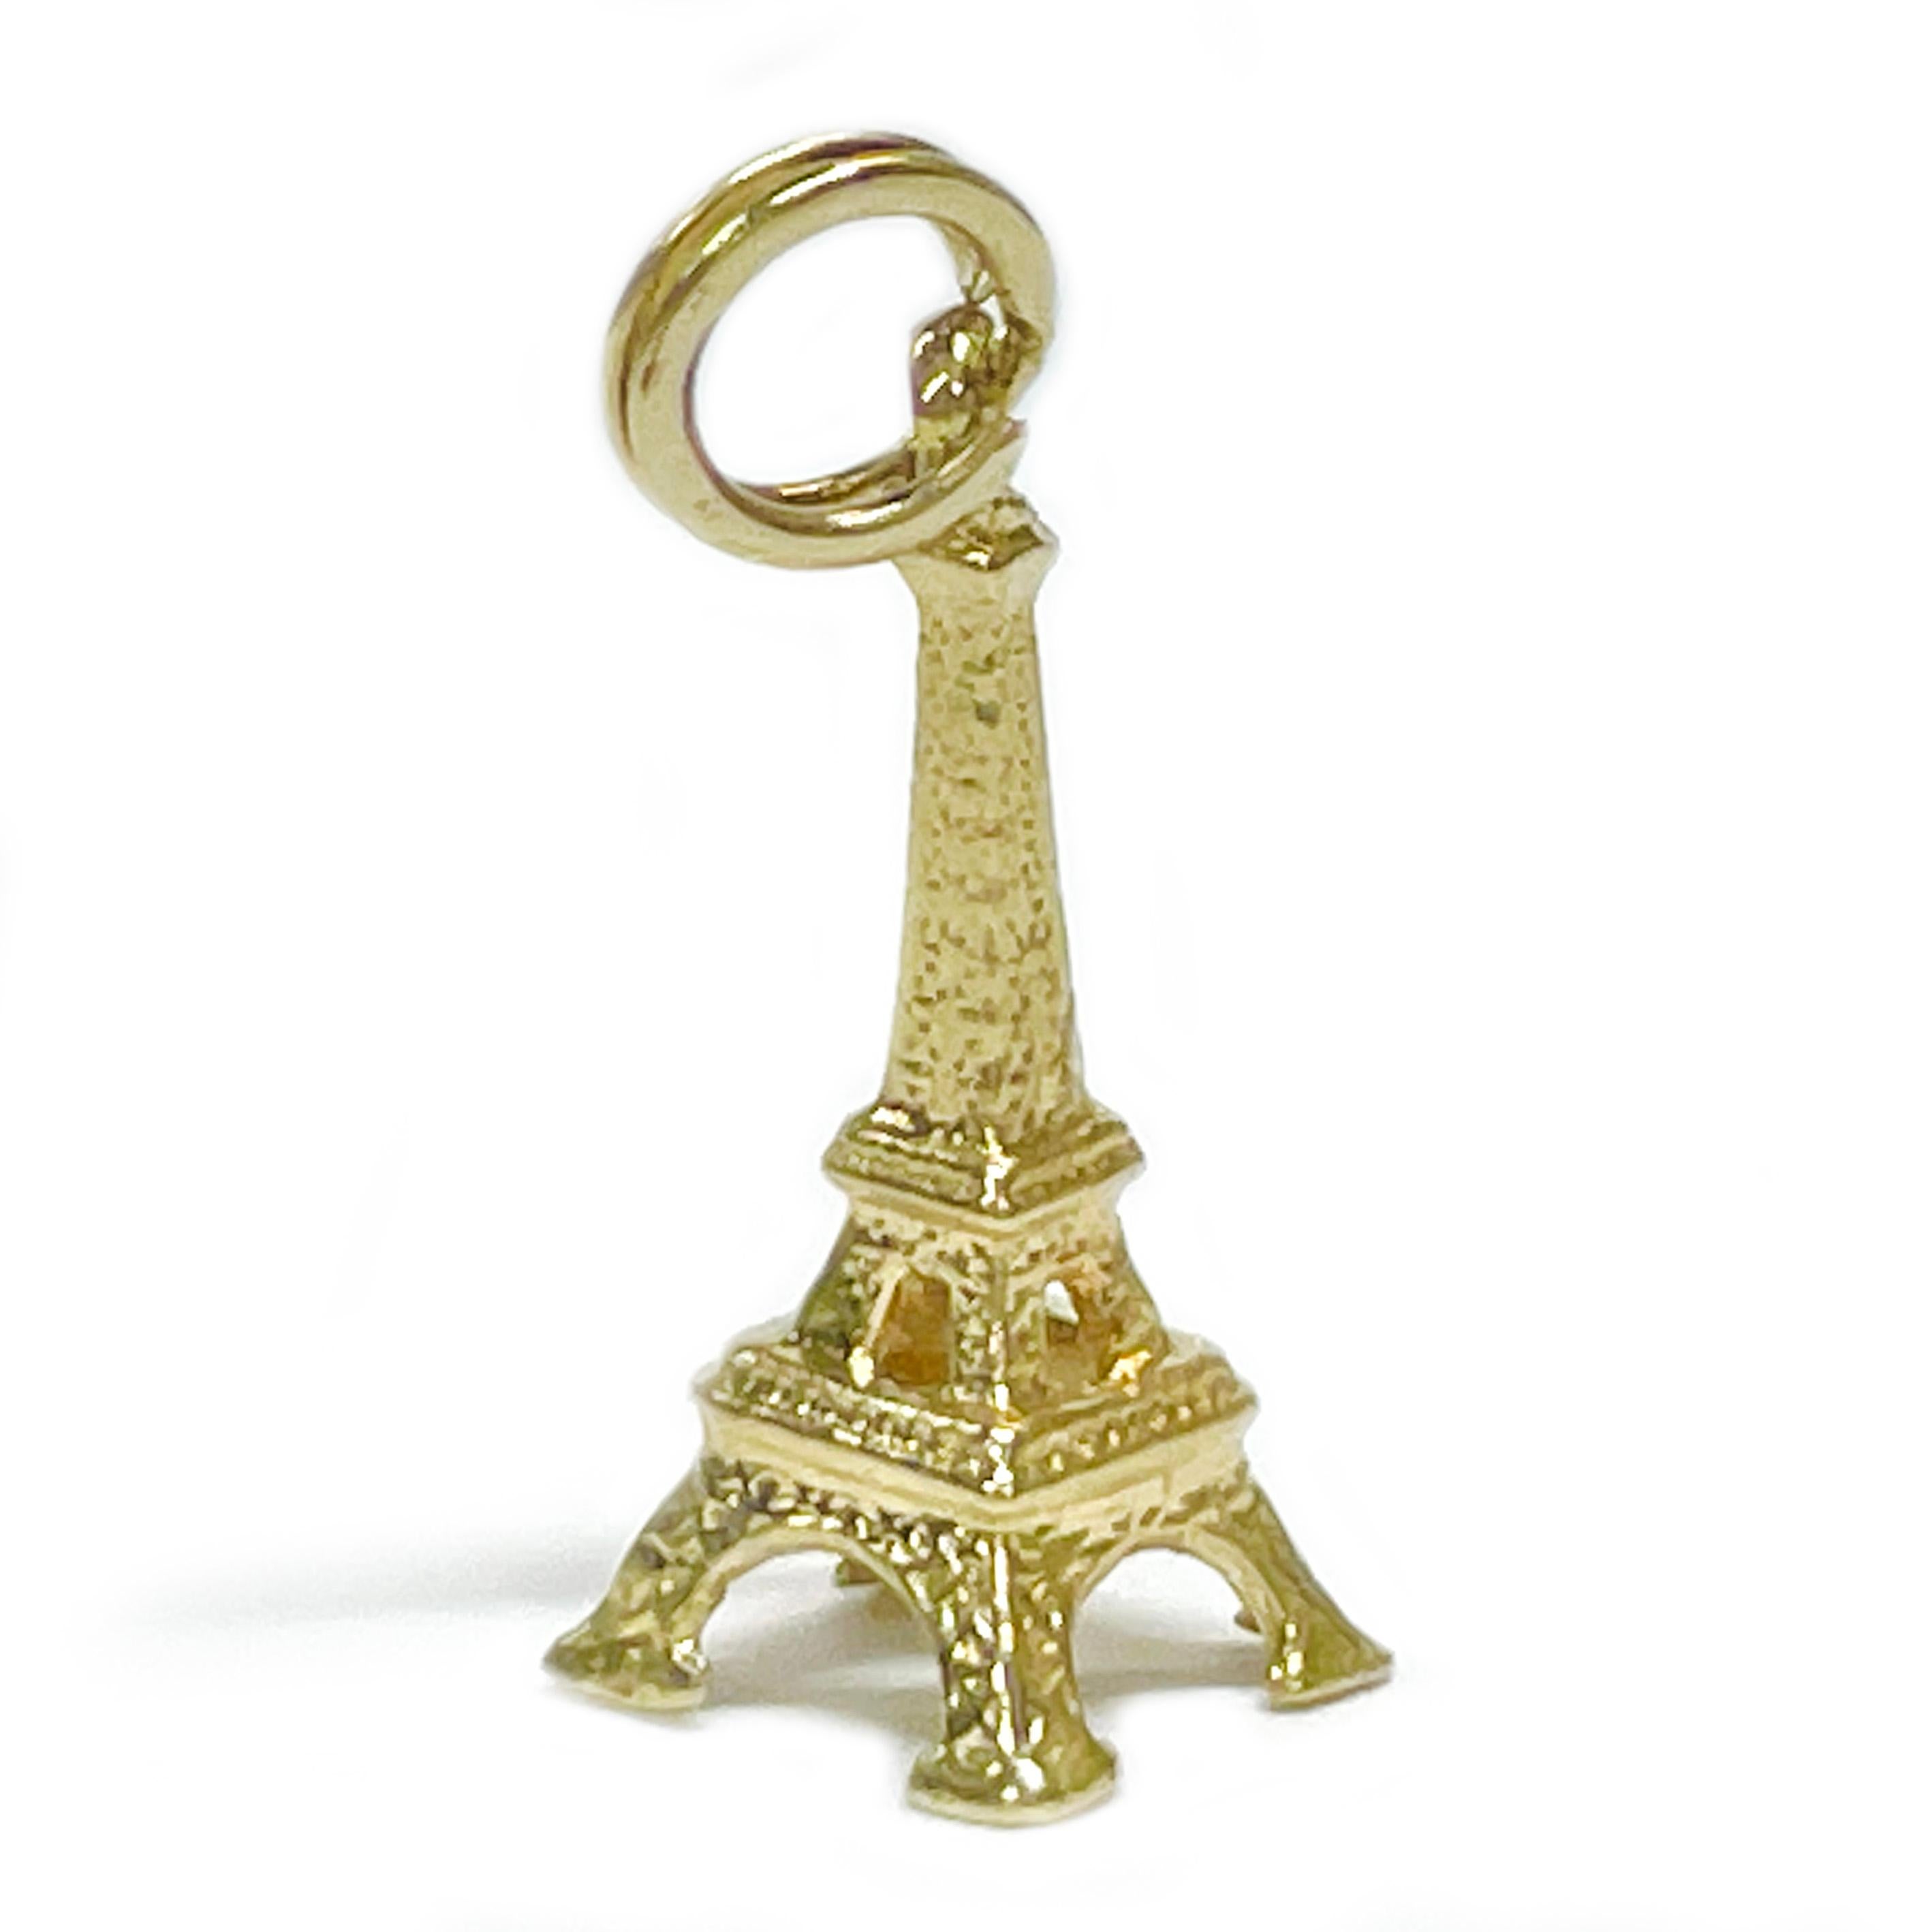 Tested 14 Karat Yellow Gold Eiffel Tower Charm Pendant. This darling charm pendant features details in harmony with the real structure in Paris, France. The pendant measures 20.9mm high (not including split ring) x 8.3mm wide. Wear on a necklace or